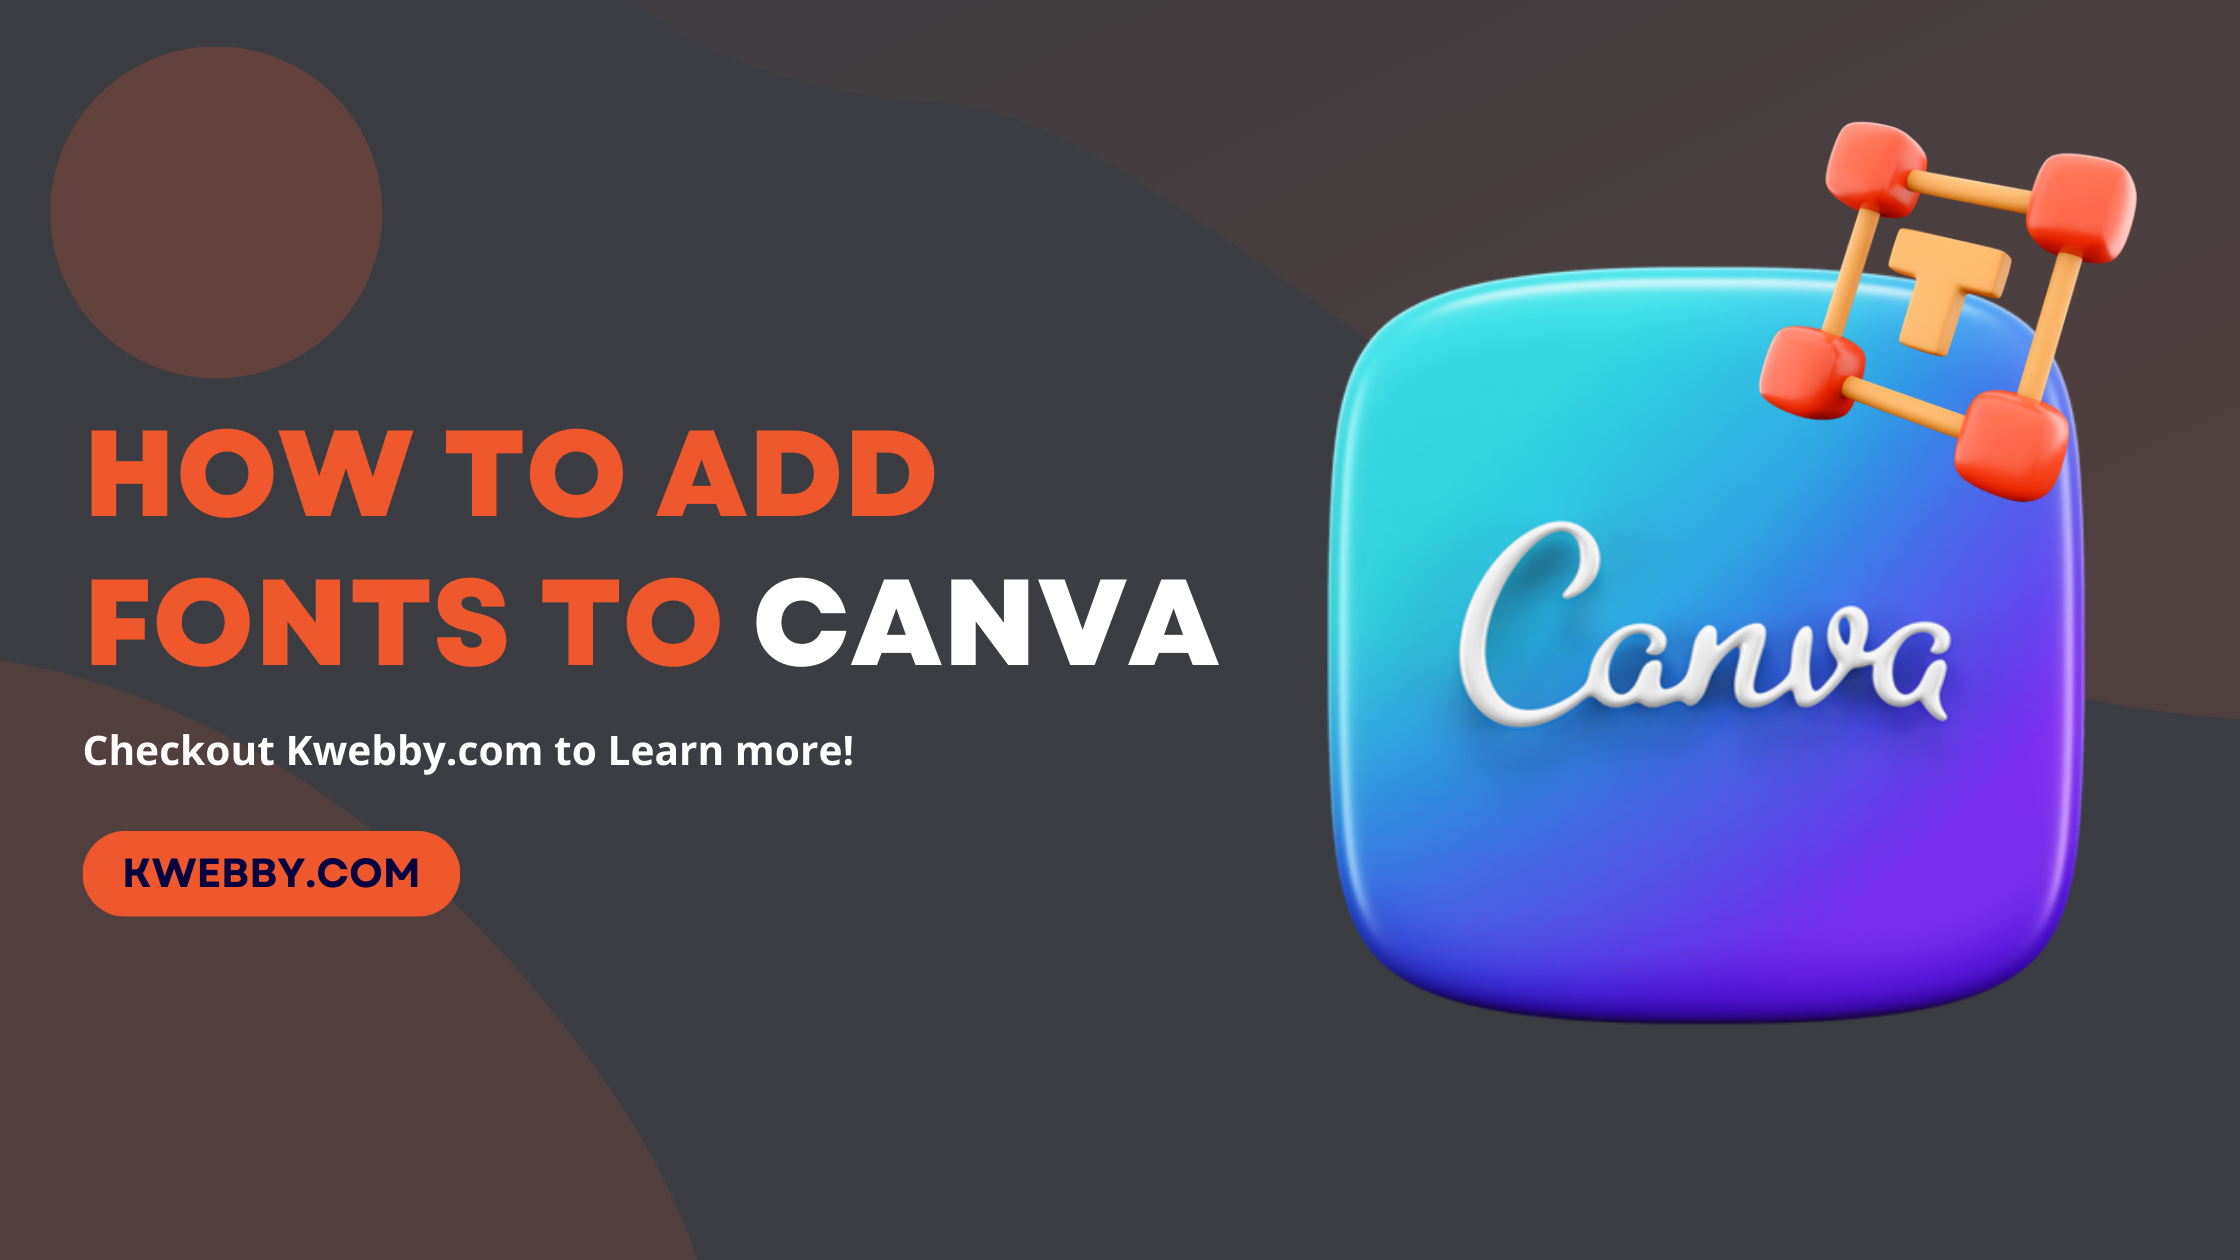 How to Add Fonts to Canva